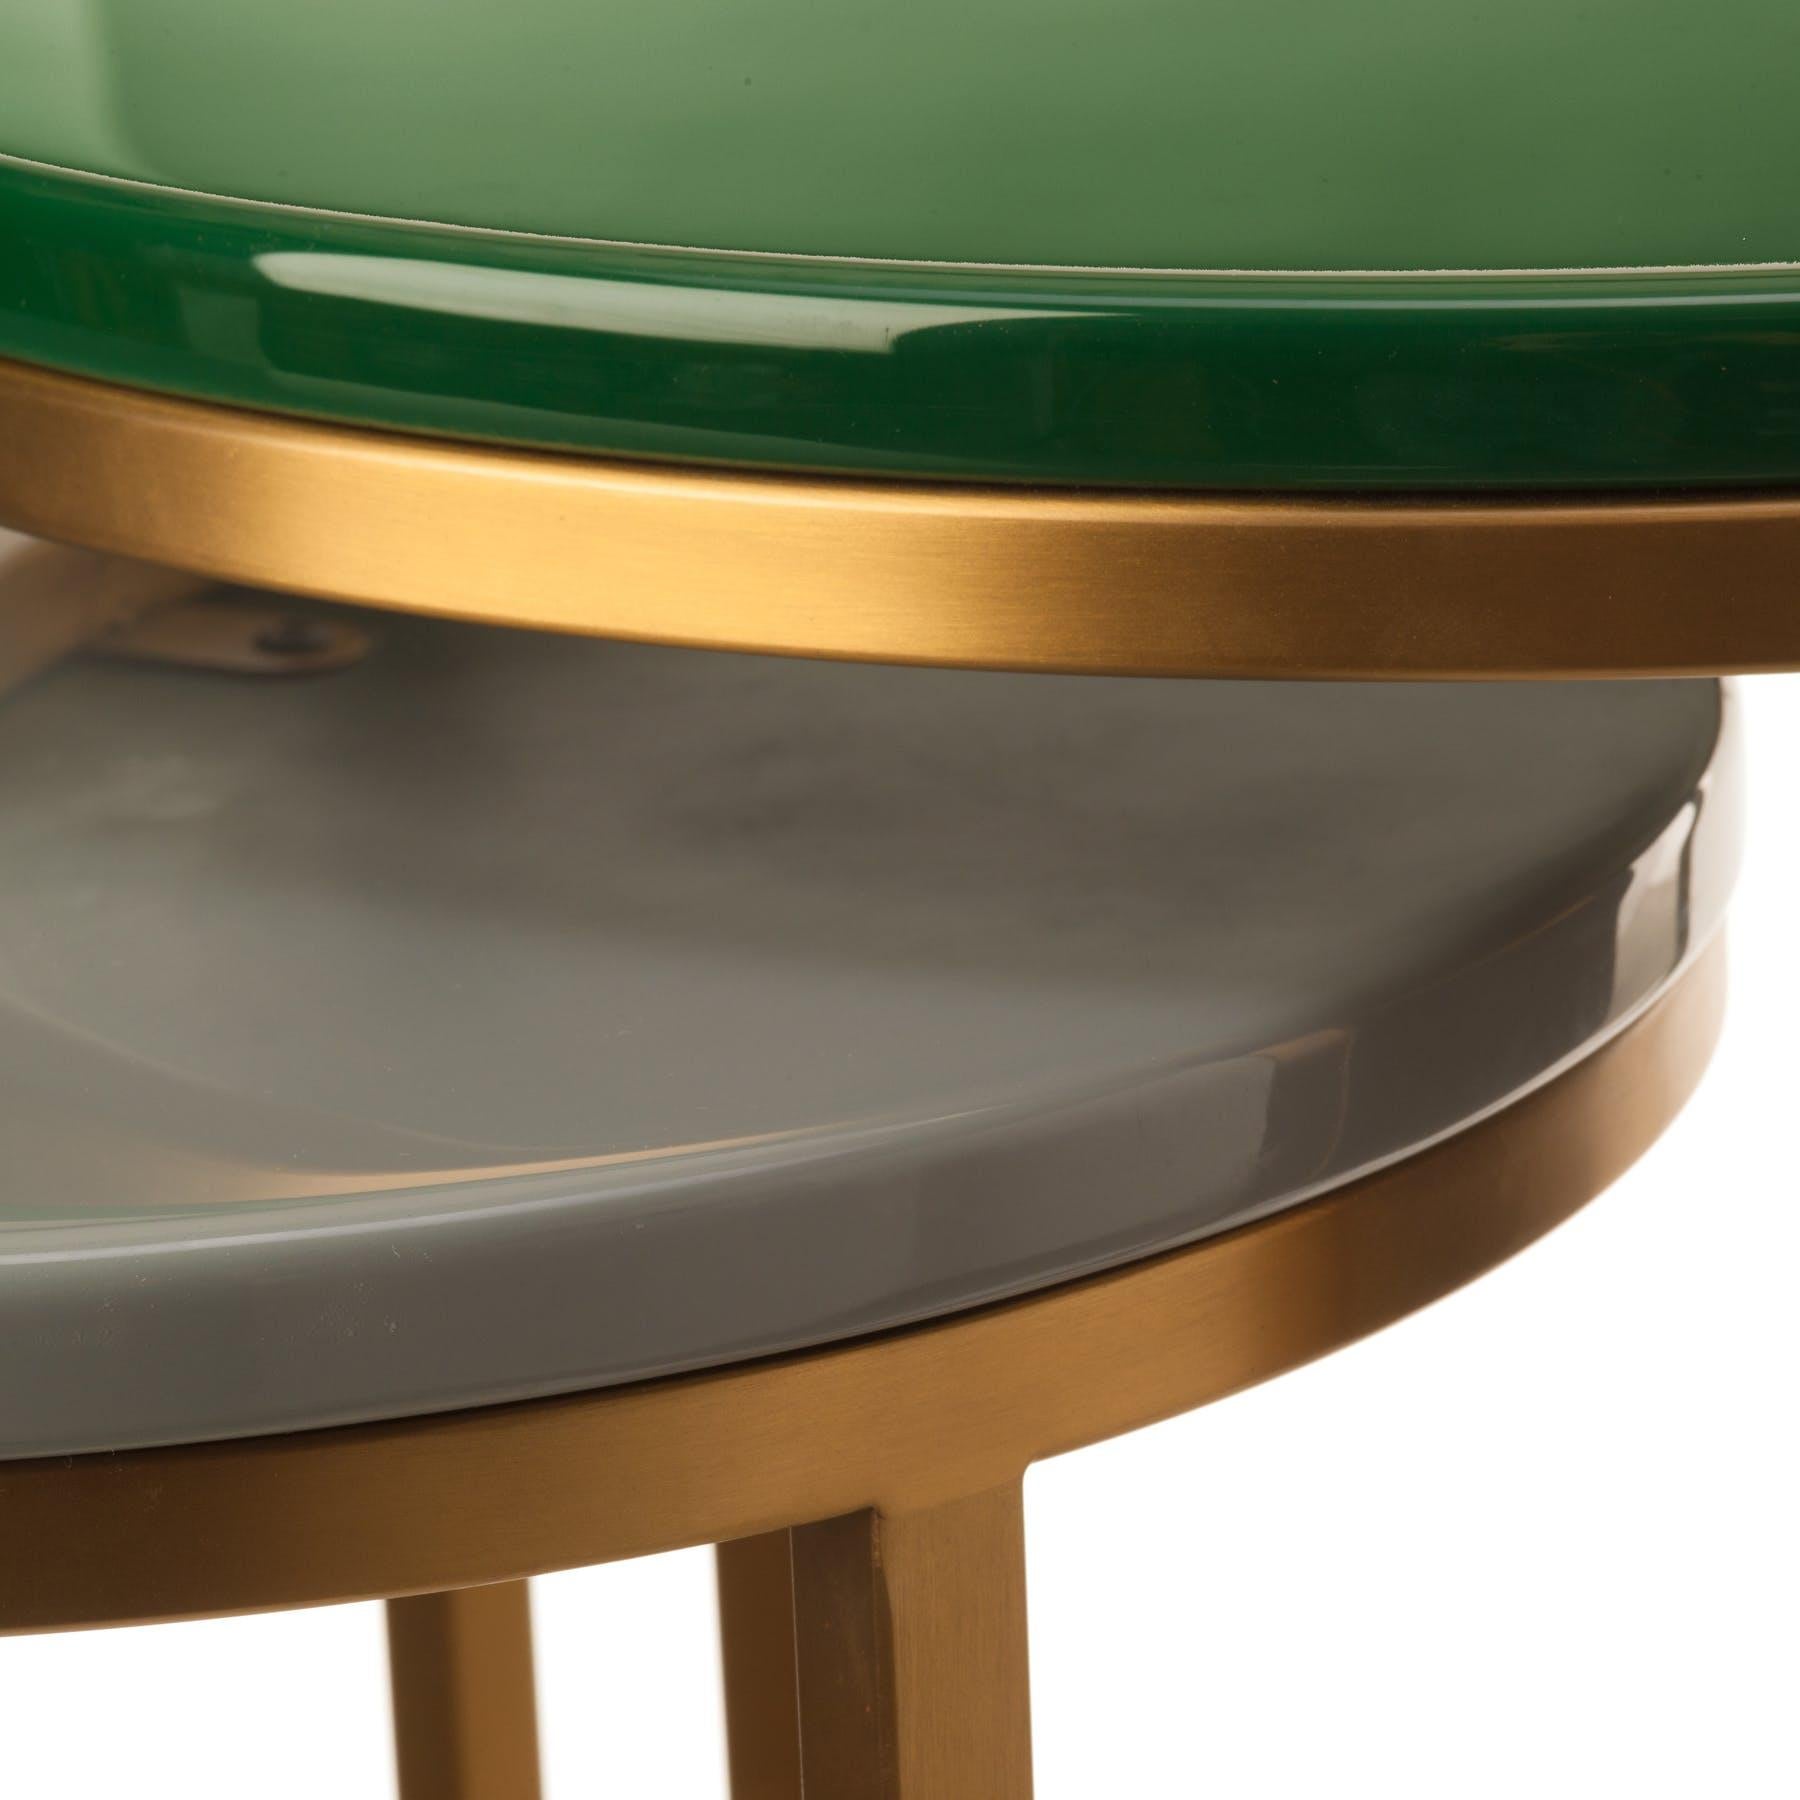 Modern glossy coffee table - Pols Potten Studio
Dimensions: 76 diameter x height 40 cm
Materials: Brushed gold plated, stainless steel frame, resin top


Pols Potten products are characterised by a modern twist on traditional design. Each of